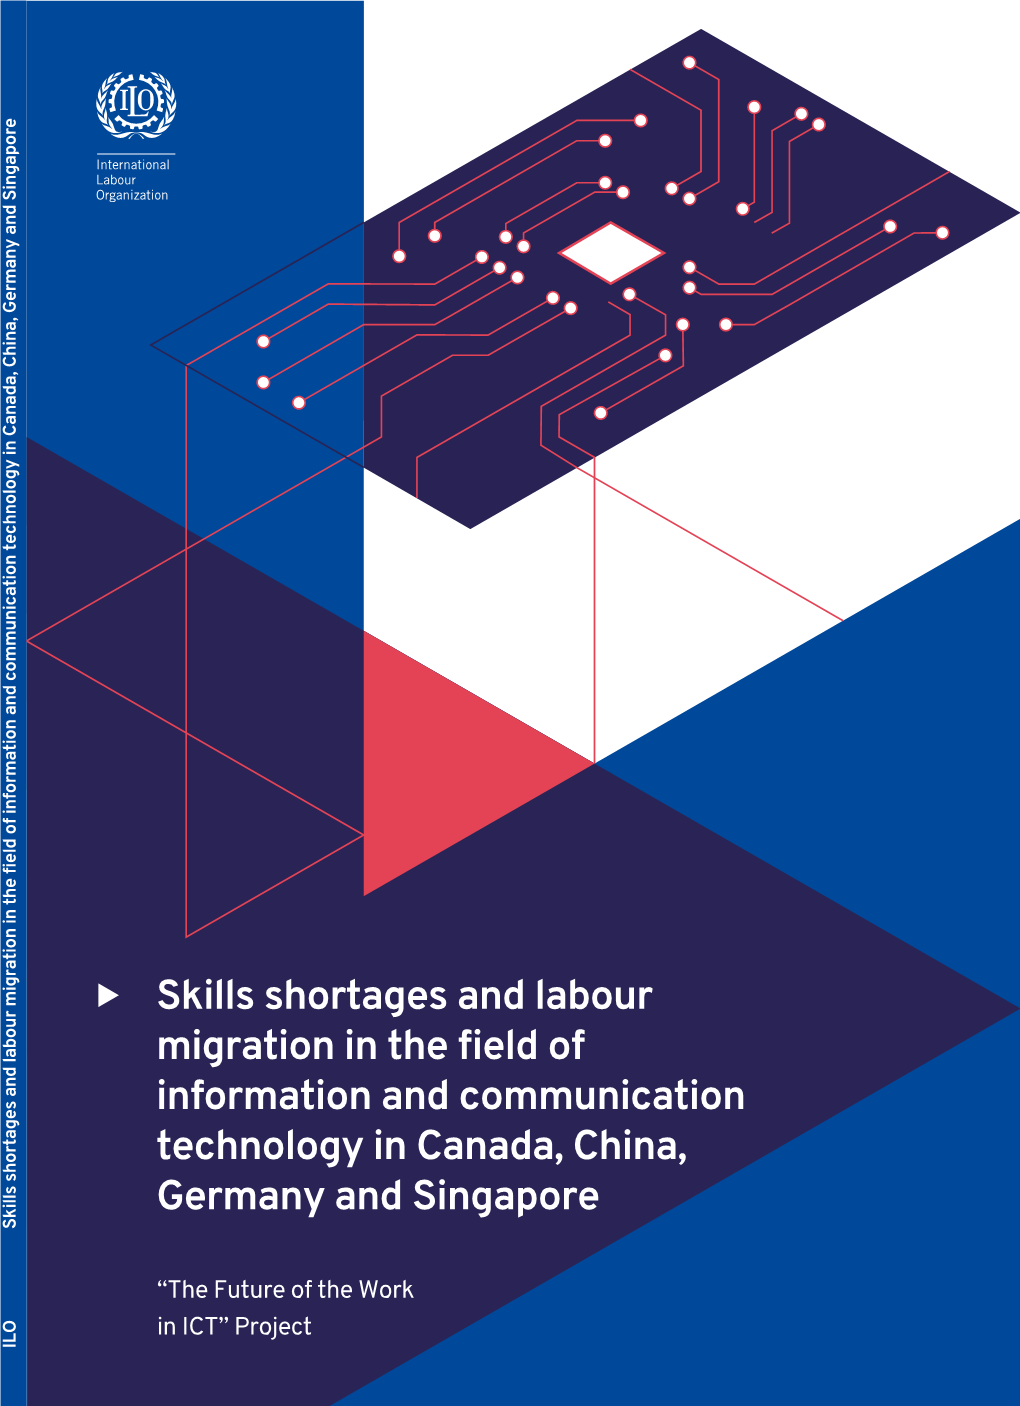 Skills Shortages and Labour Migration in the ﬁeld of Information and Communication Technology in Canada, China, Germany and Singapore ISBN 978-92-2-032857-6